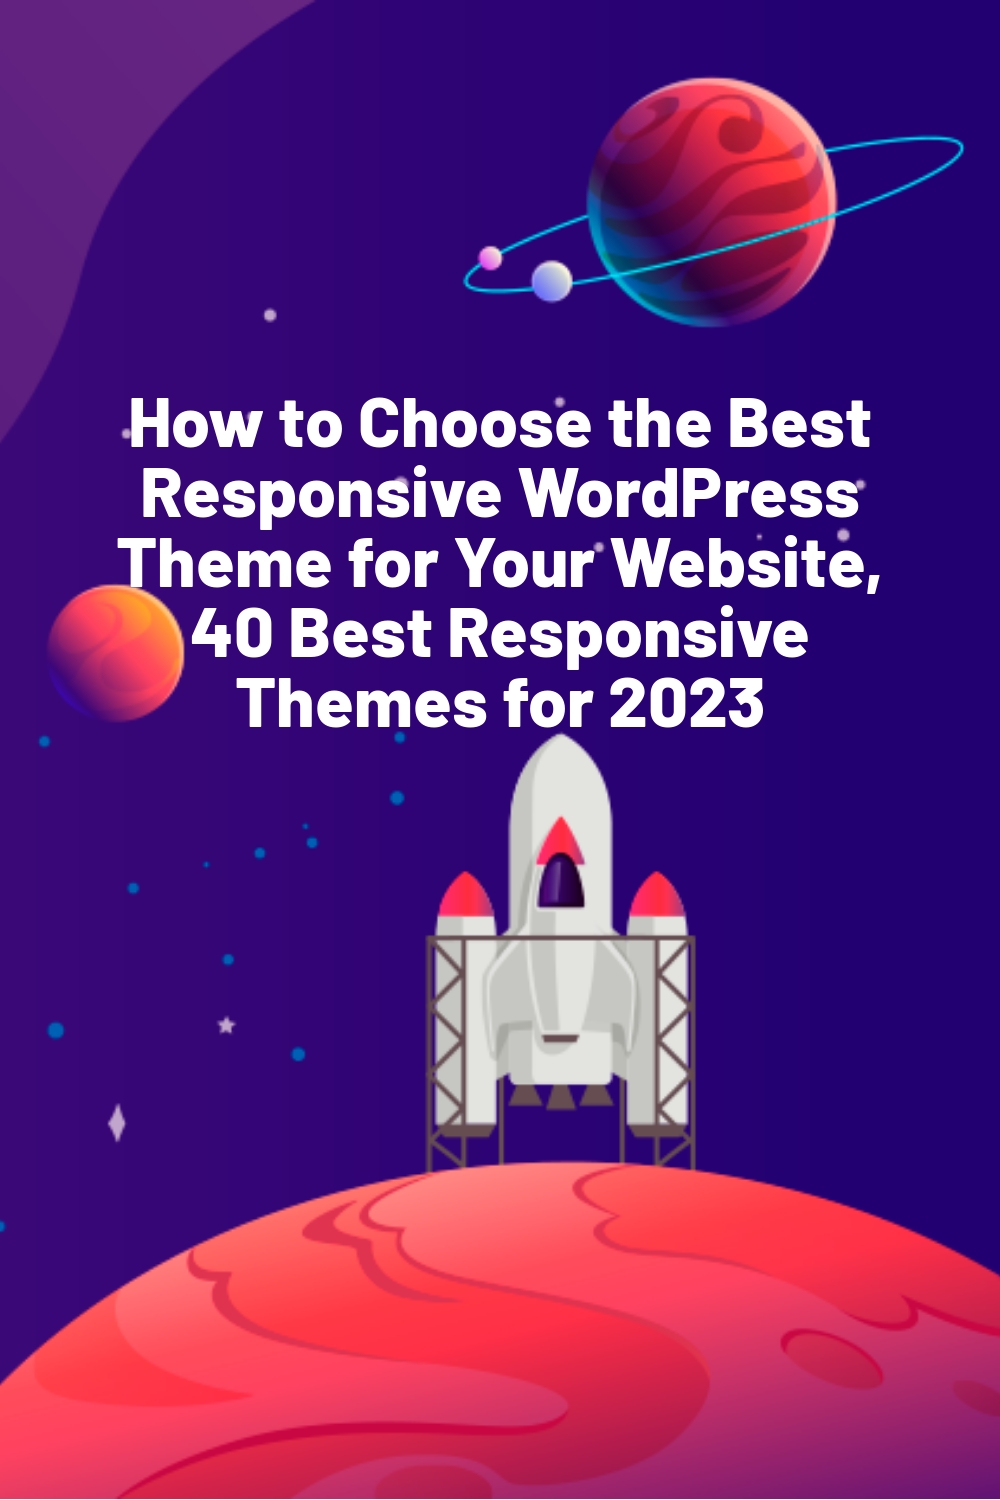 How to Choose the Best Responsive WordPress Theme for Your Website, 40 Best Responsive Themes for 2023